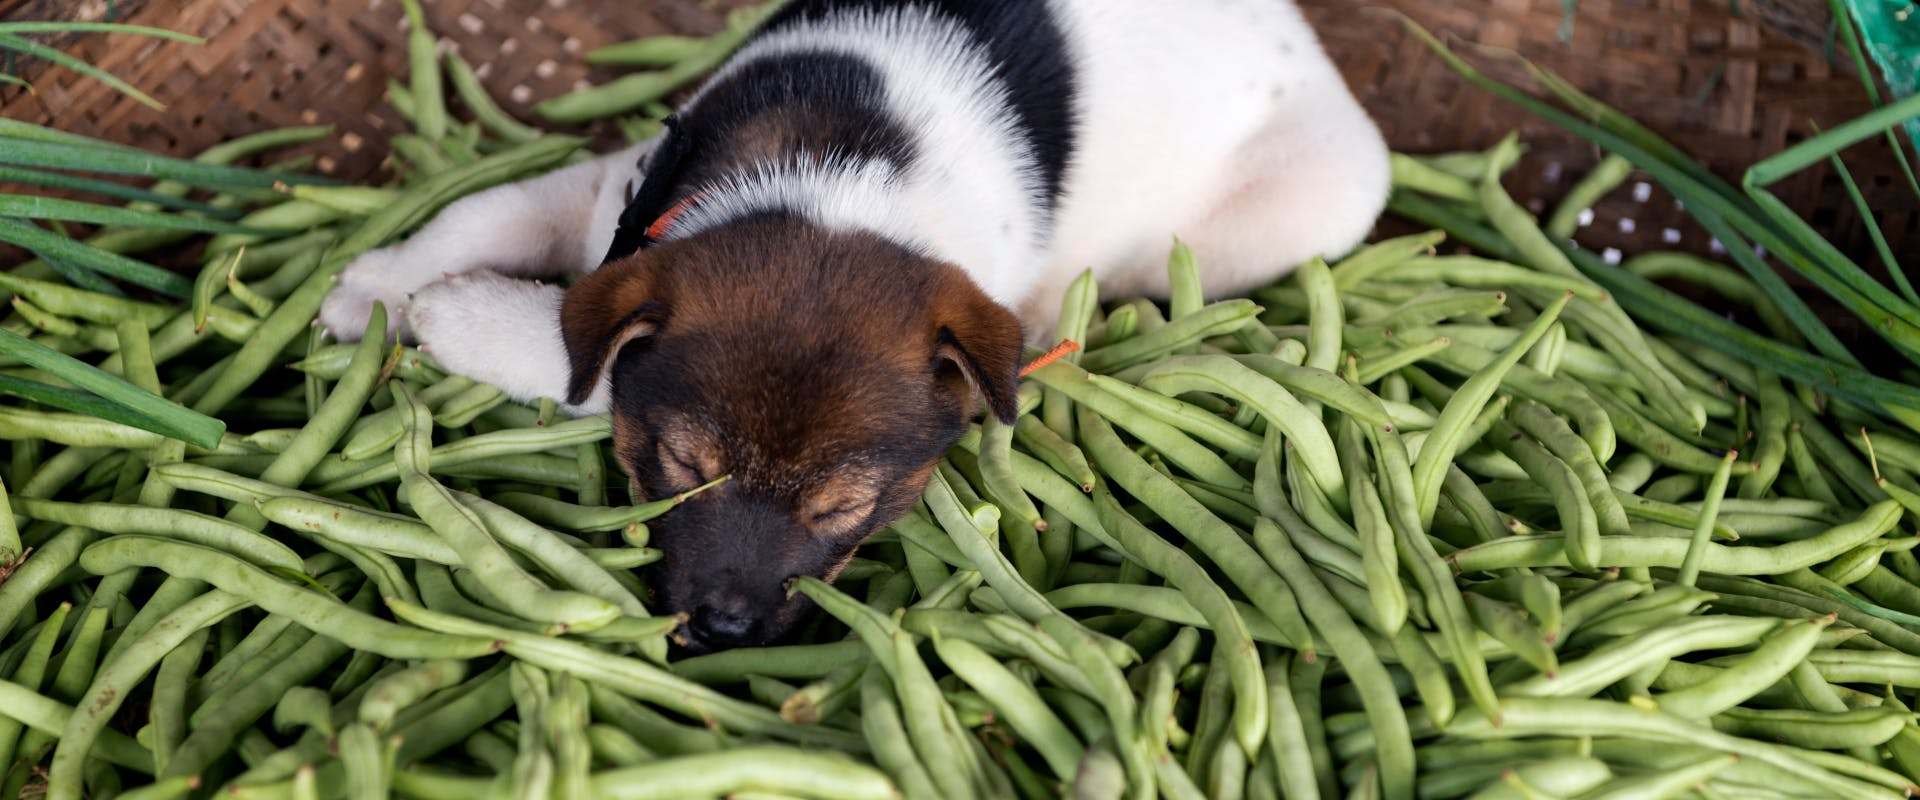 a black and white puppy asleep on a pile of green beans